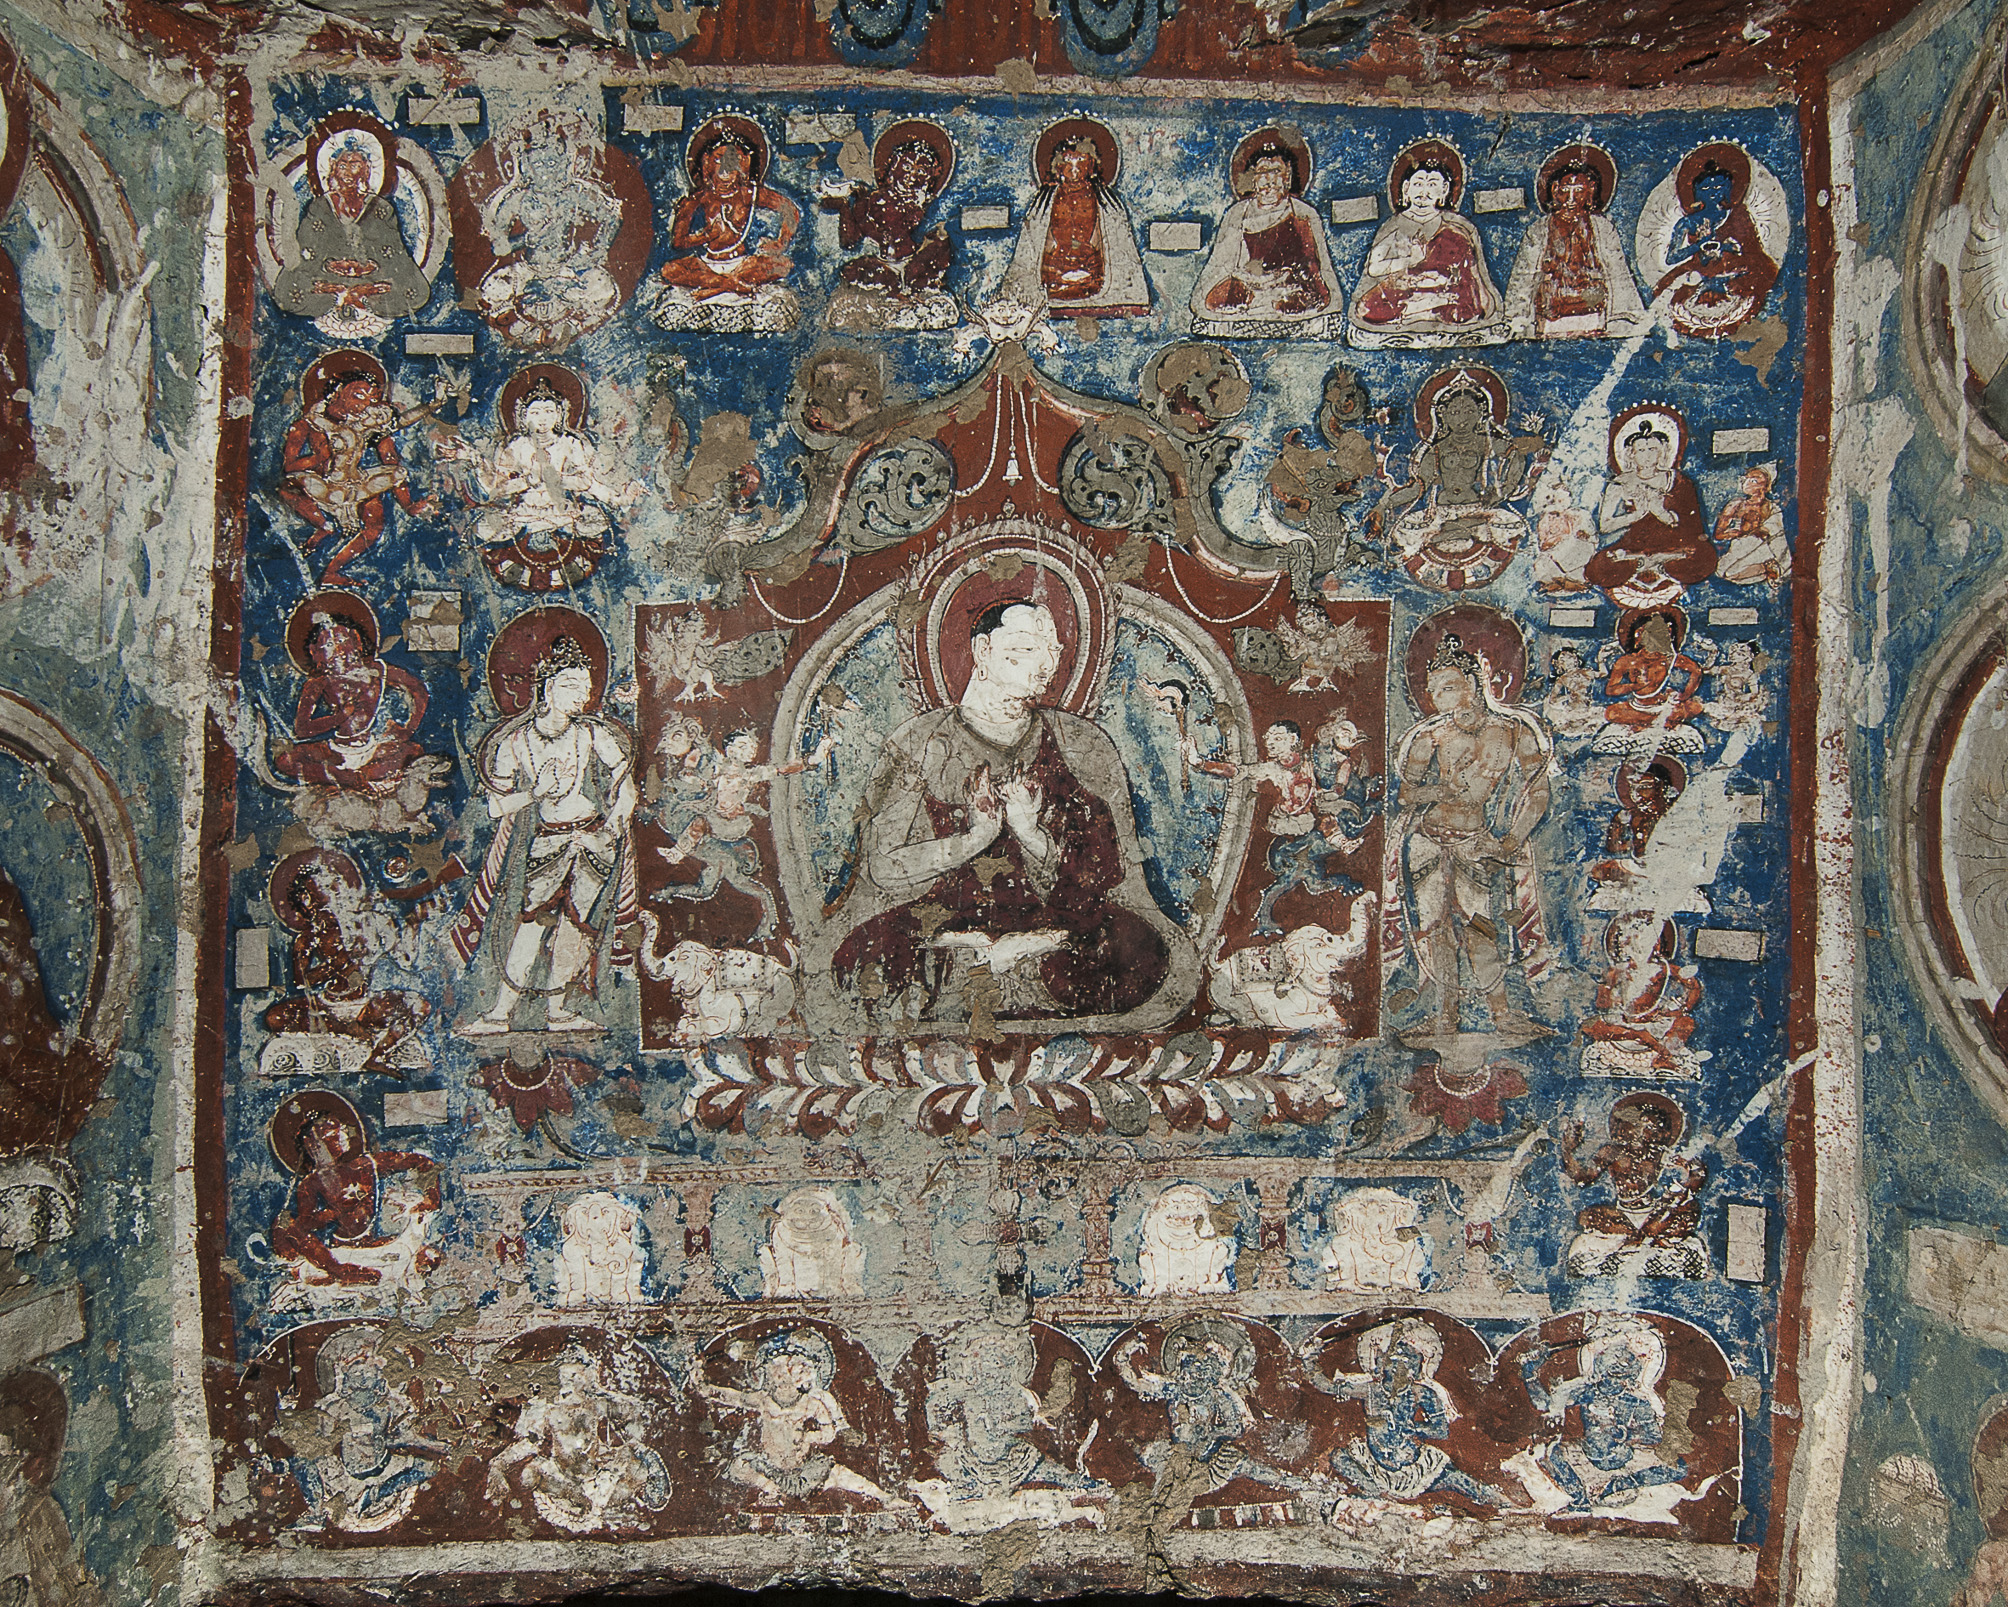 Mural depicting holy man surrounded by dozens of figures arranged in registers against blue and red background